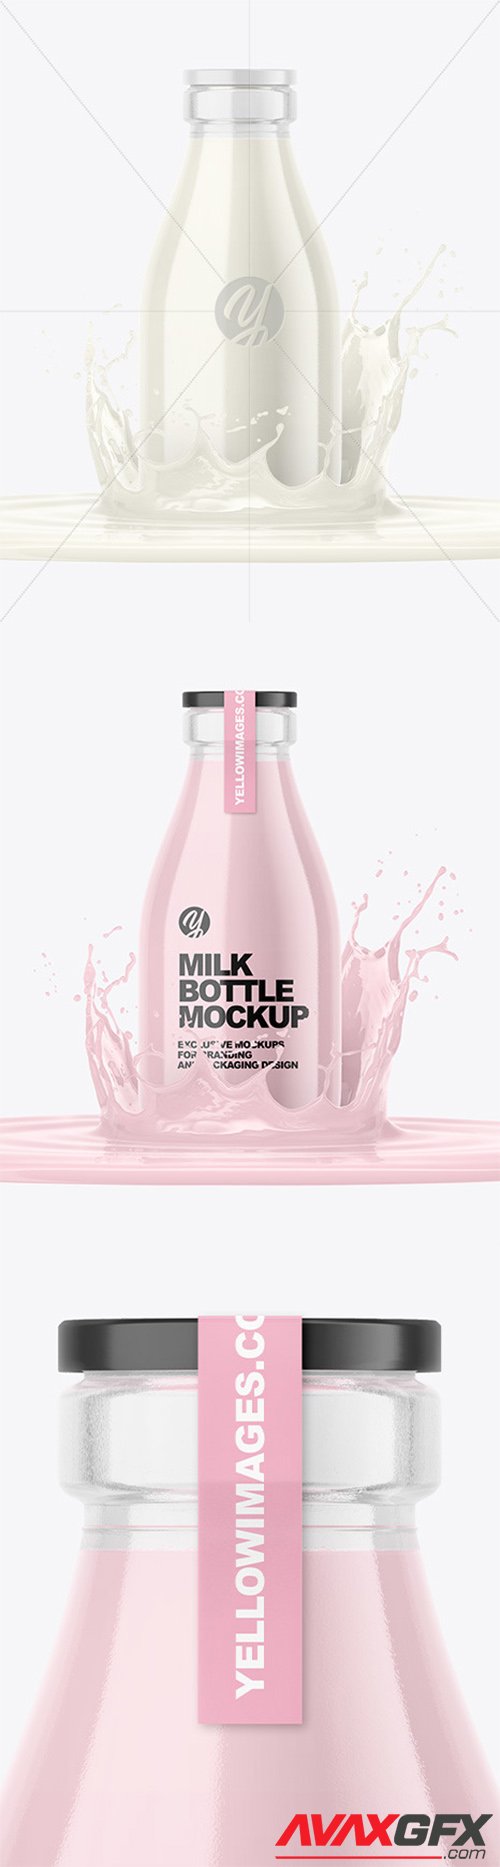 Clear Glass Dairy Bottle with Splash Mockup 61529